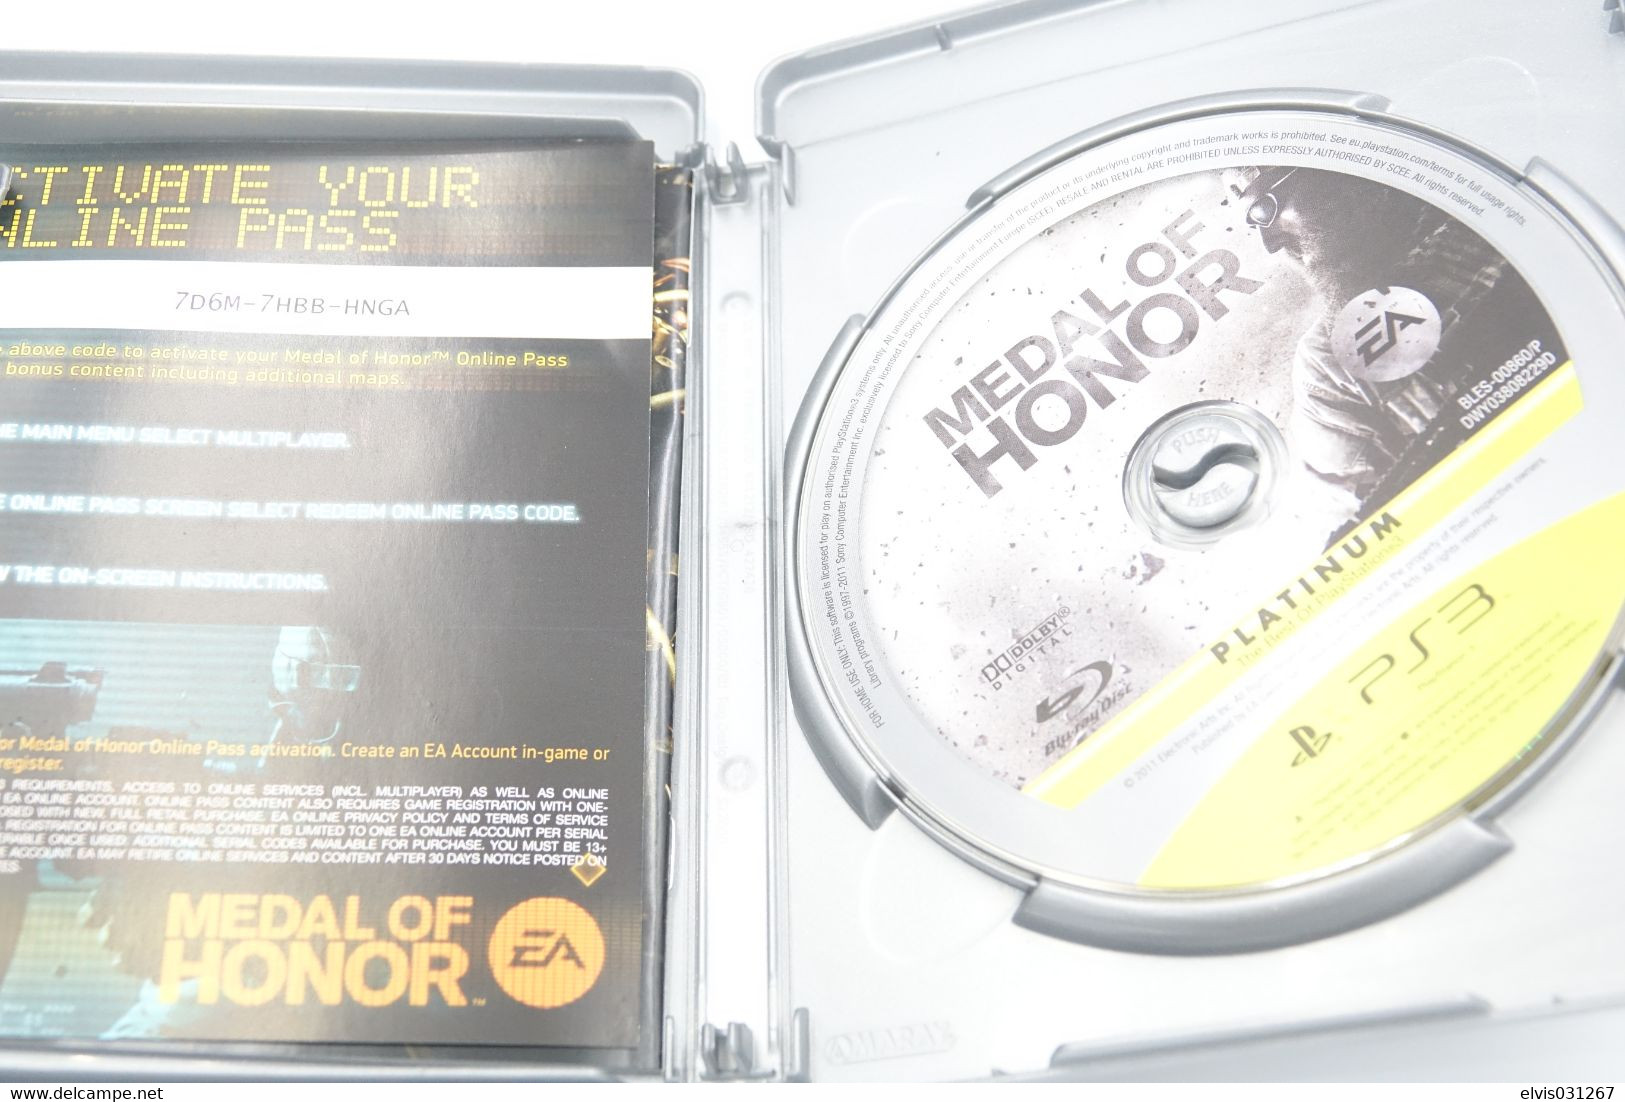 SONY PLAYSTATION THREE PS3 : MEDAL OF HONOR - PLATINUM - ELECTRONIC ARTS - PS3